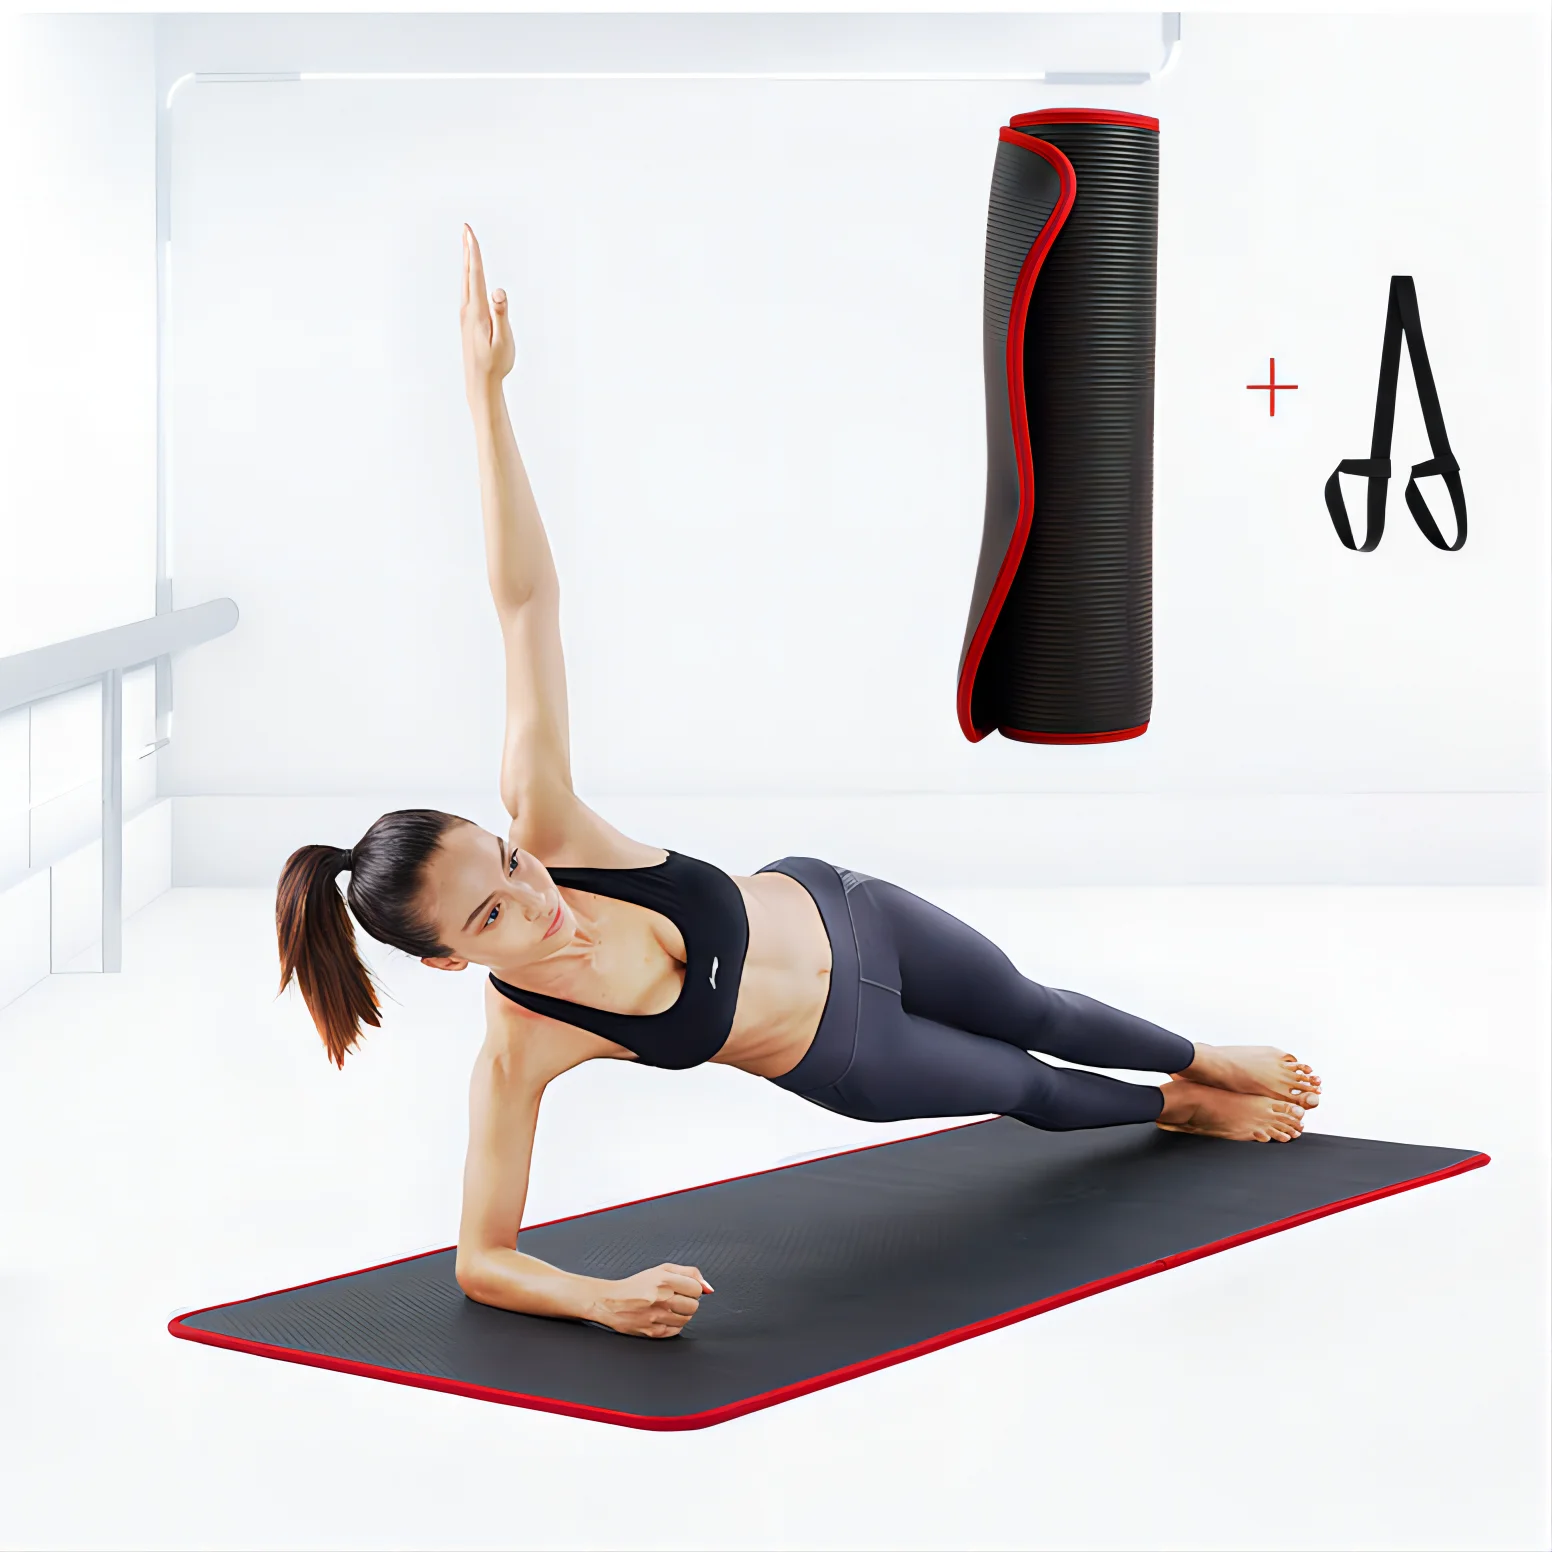 10MM Extra Thick Yoga Mats Non-slip NRB Exercise Mat with Bandages Tasteless Pilates Gym Workout Fitness Mats 183cmx61cm